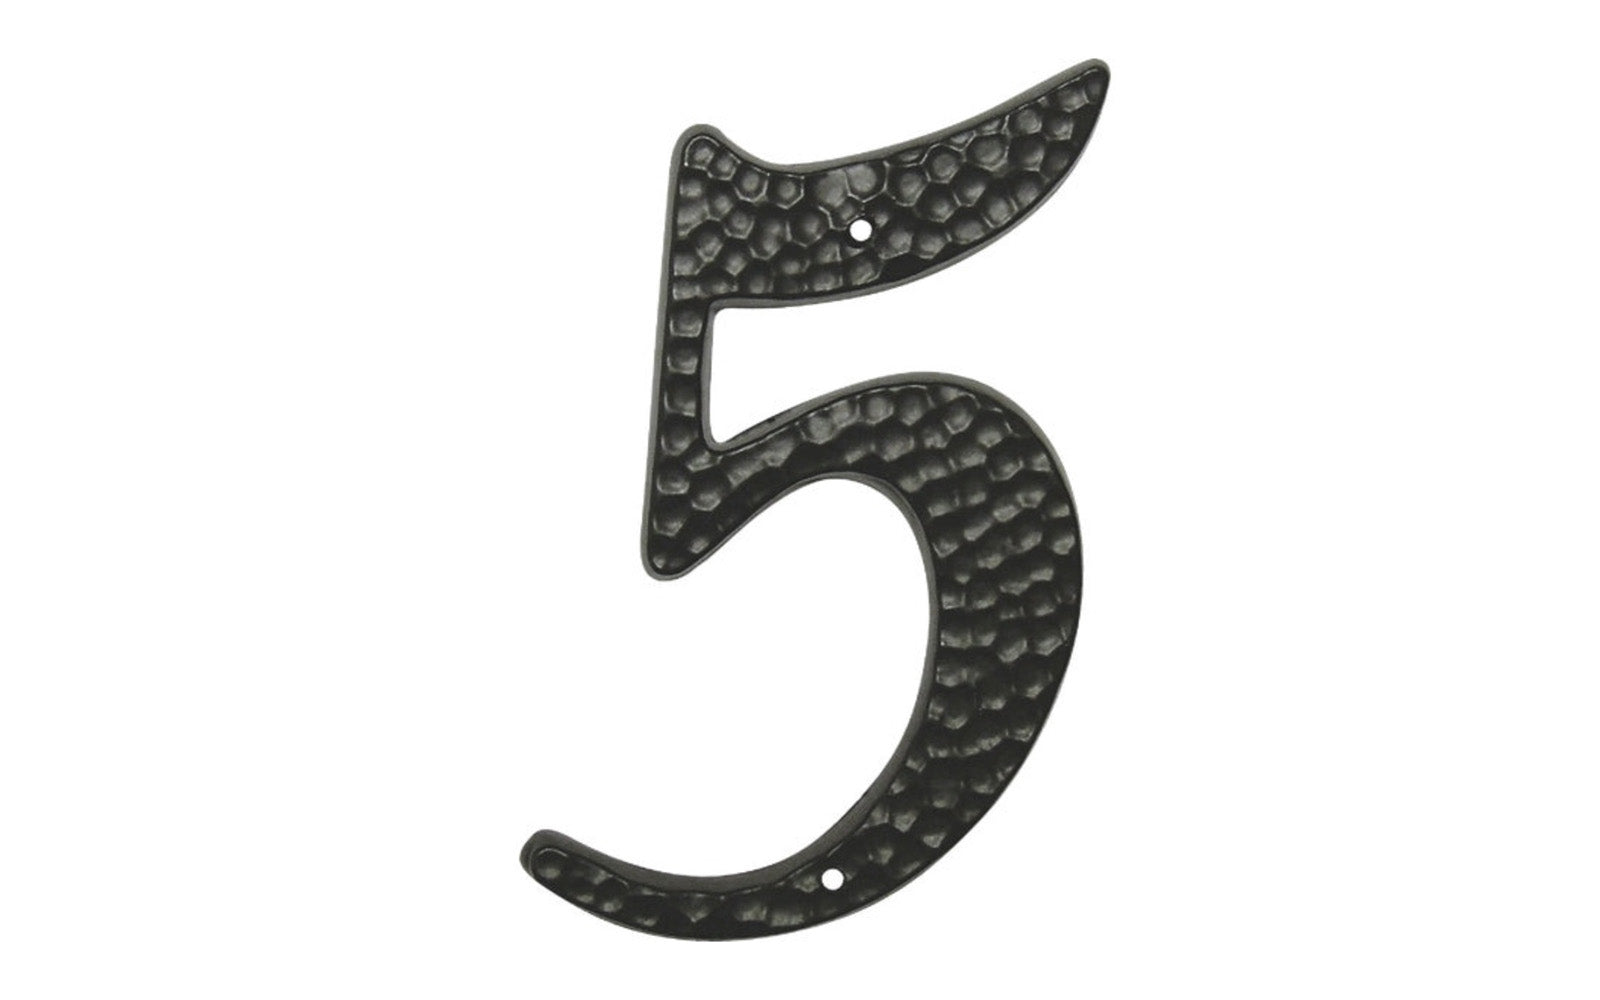 Number Five Black Hammered House Number in a 3-1/2" Size. Made of die-cast aluminum material with a black hammered style. Mounting nails included. #5 House Number. Hy-Ko Model No. DC-3/5. 029069201050.